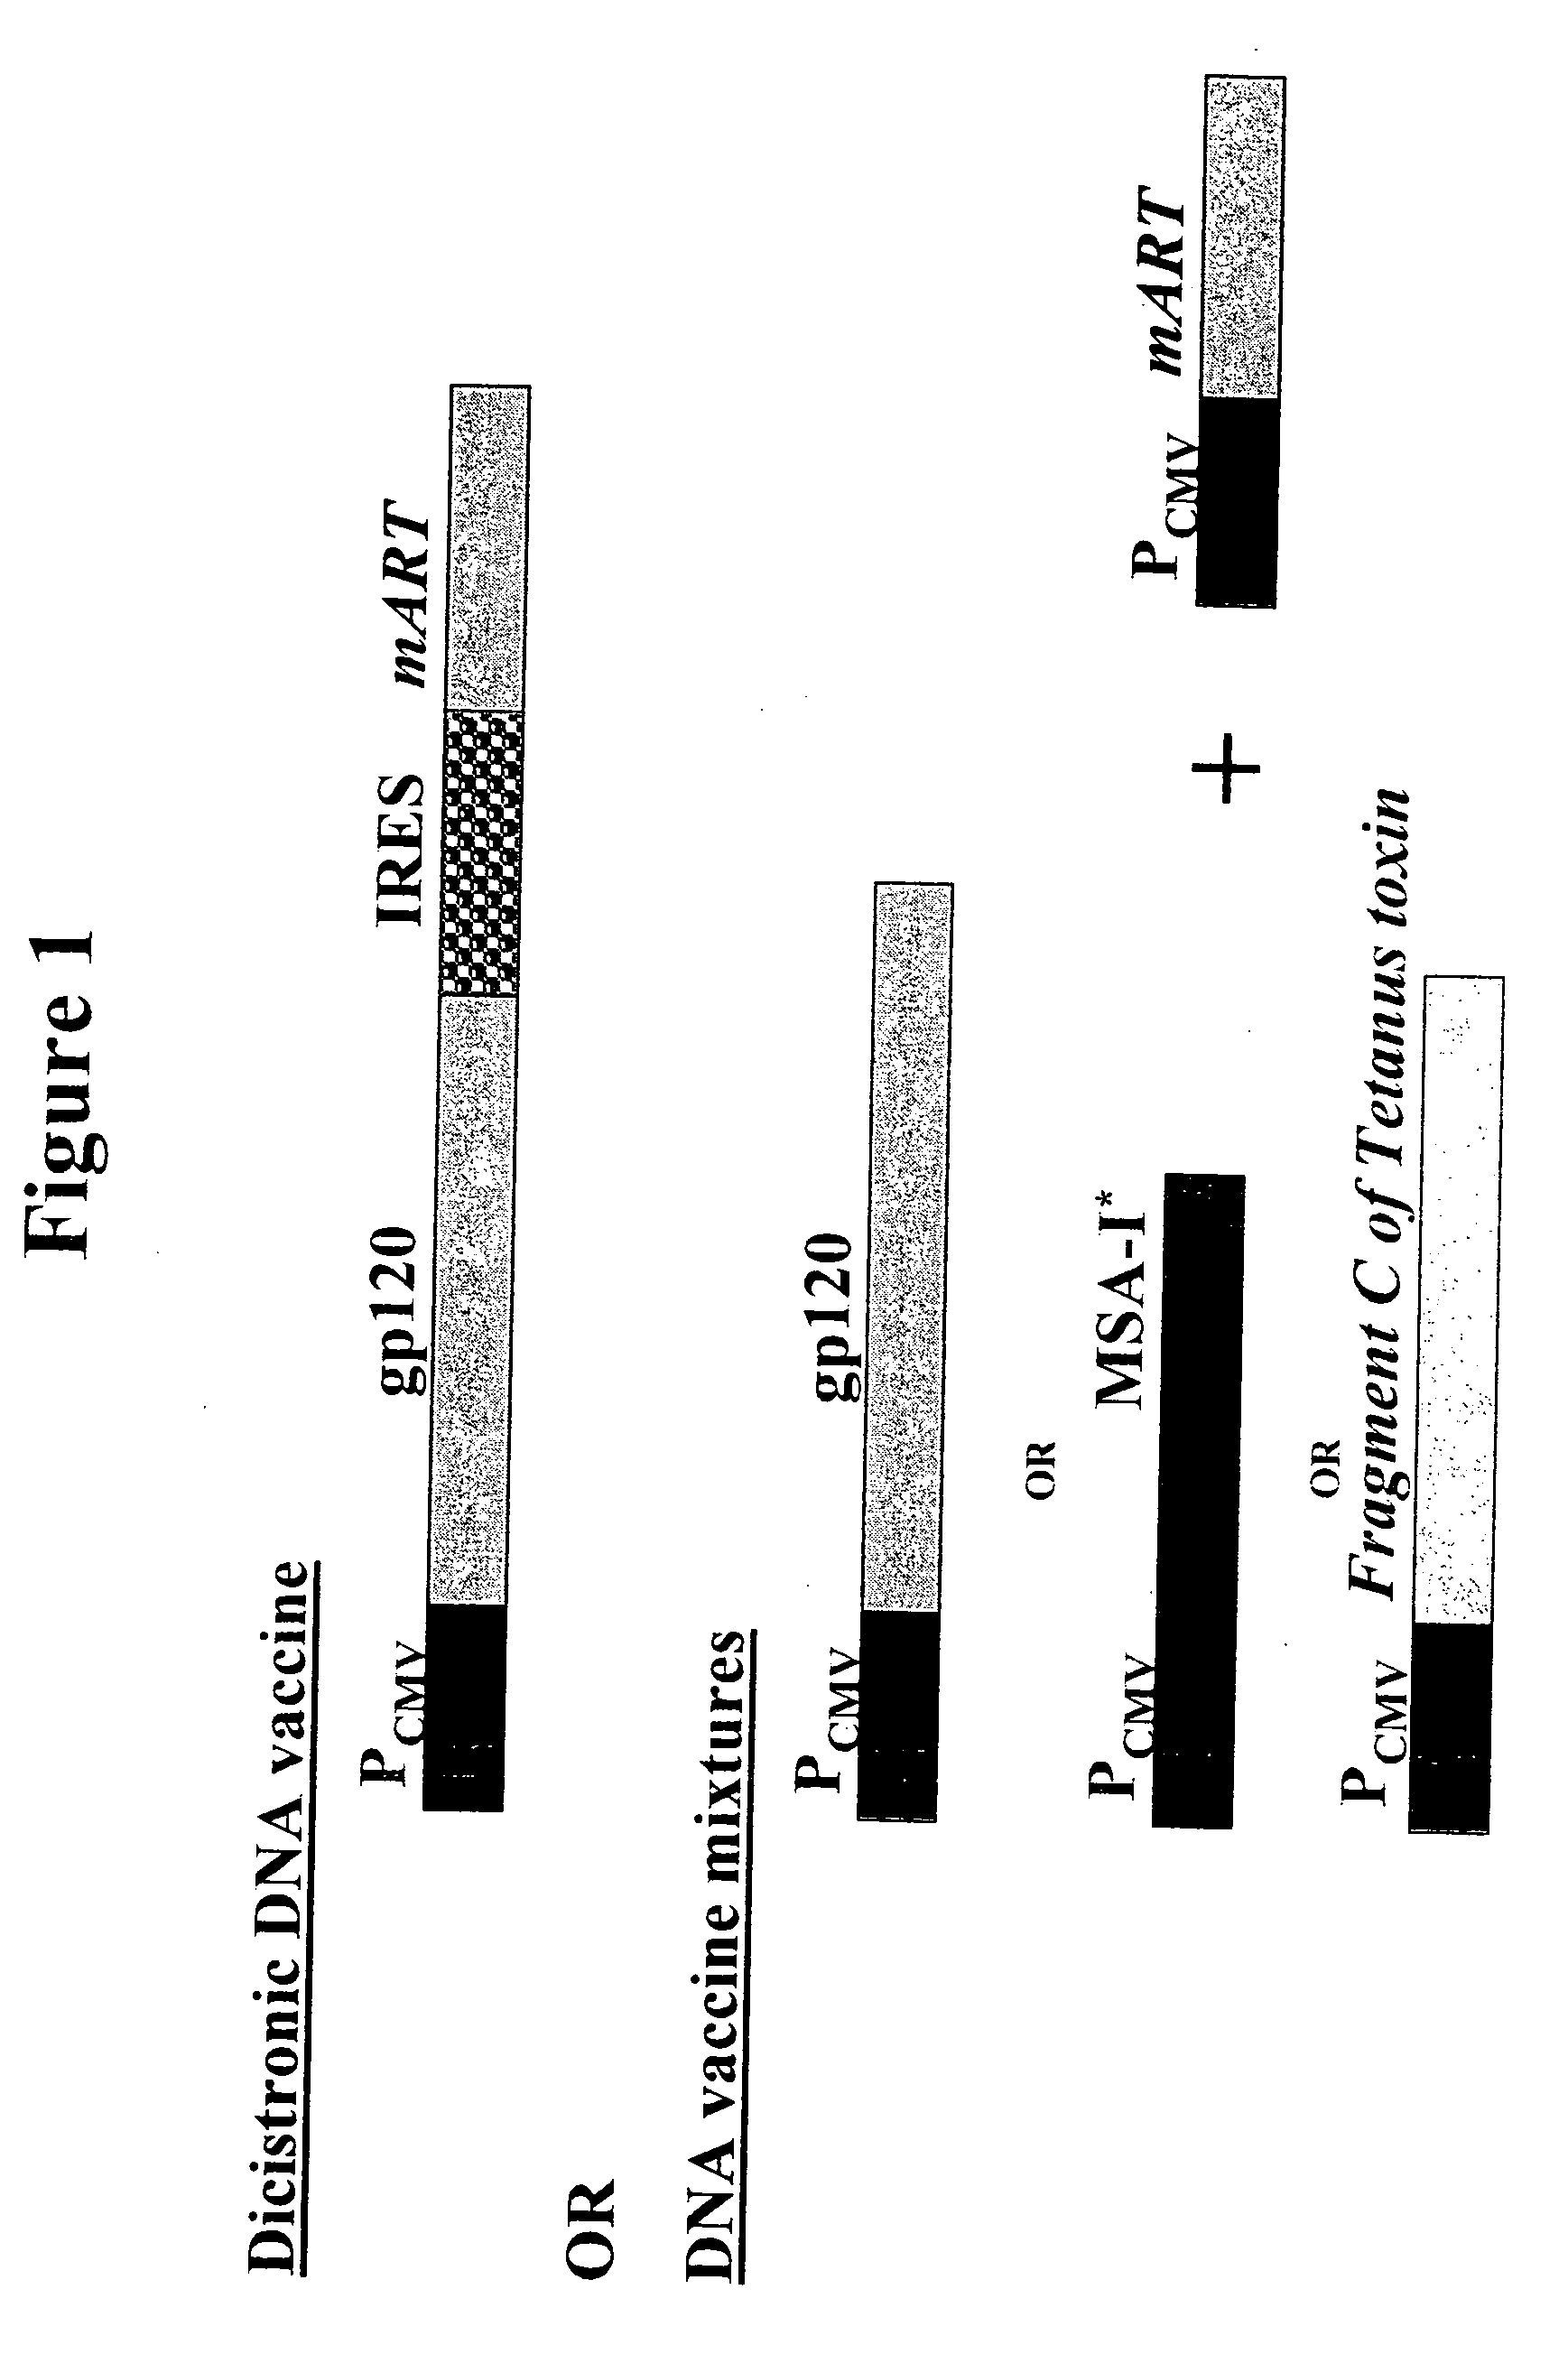 DNA vaccines that expresses mutant ADP-ribosyItransferase toxins which display reduced, or are devoid of, ADP-ribosyltransferase activity